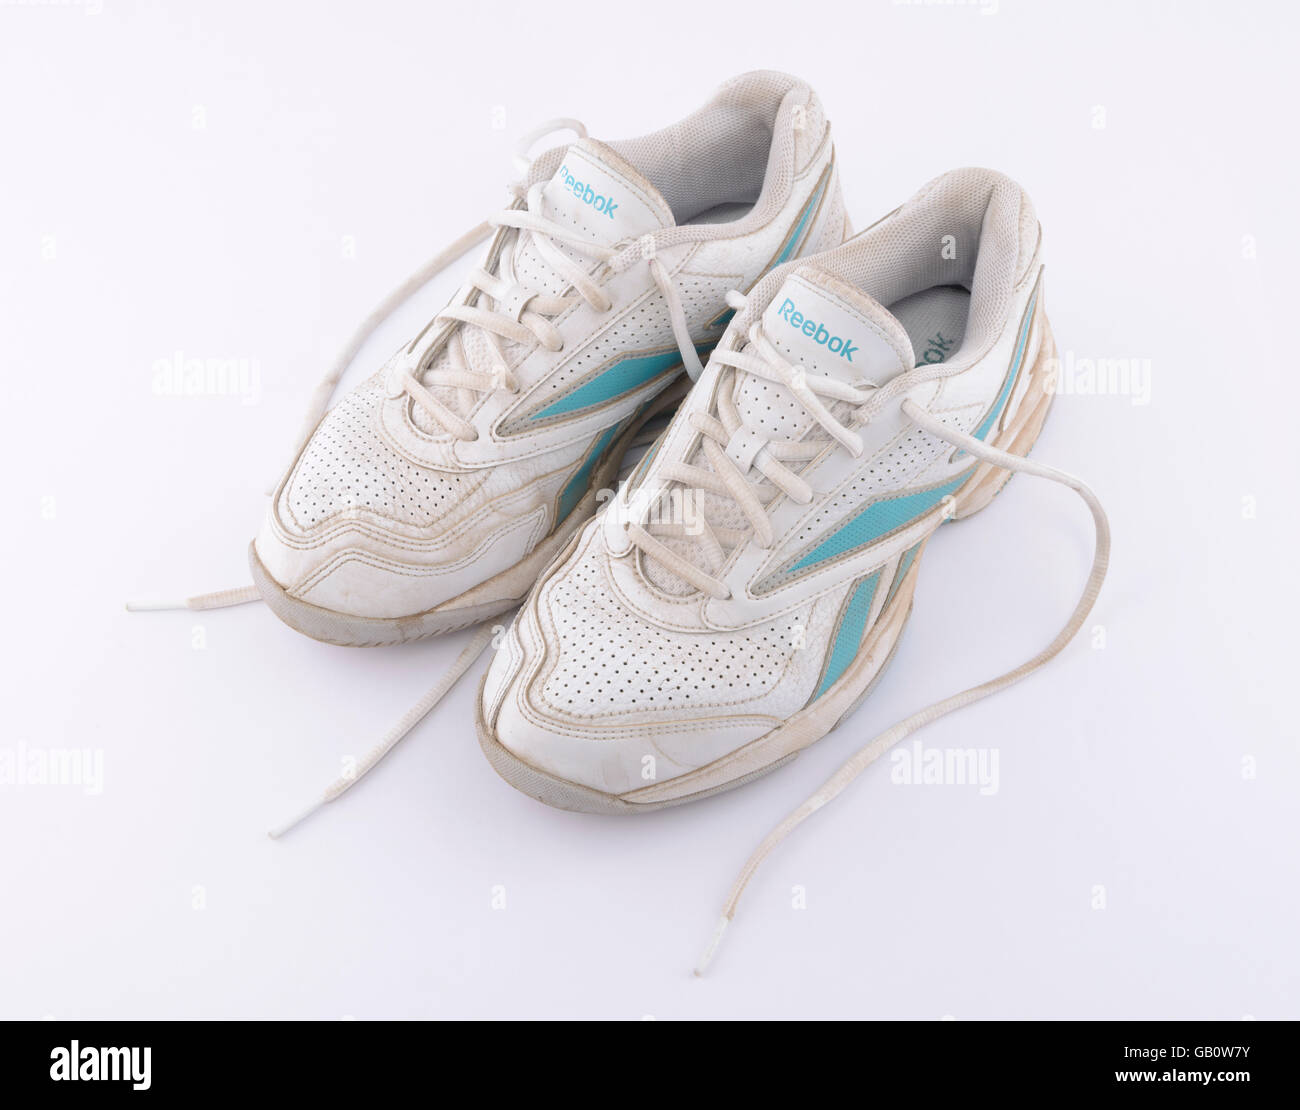 Pair of old Reebok running shoes 